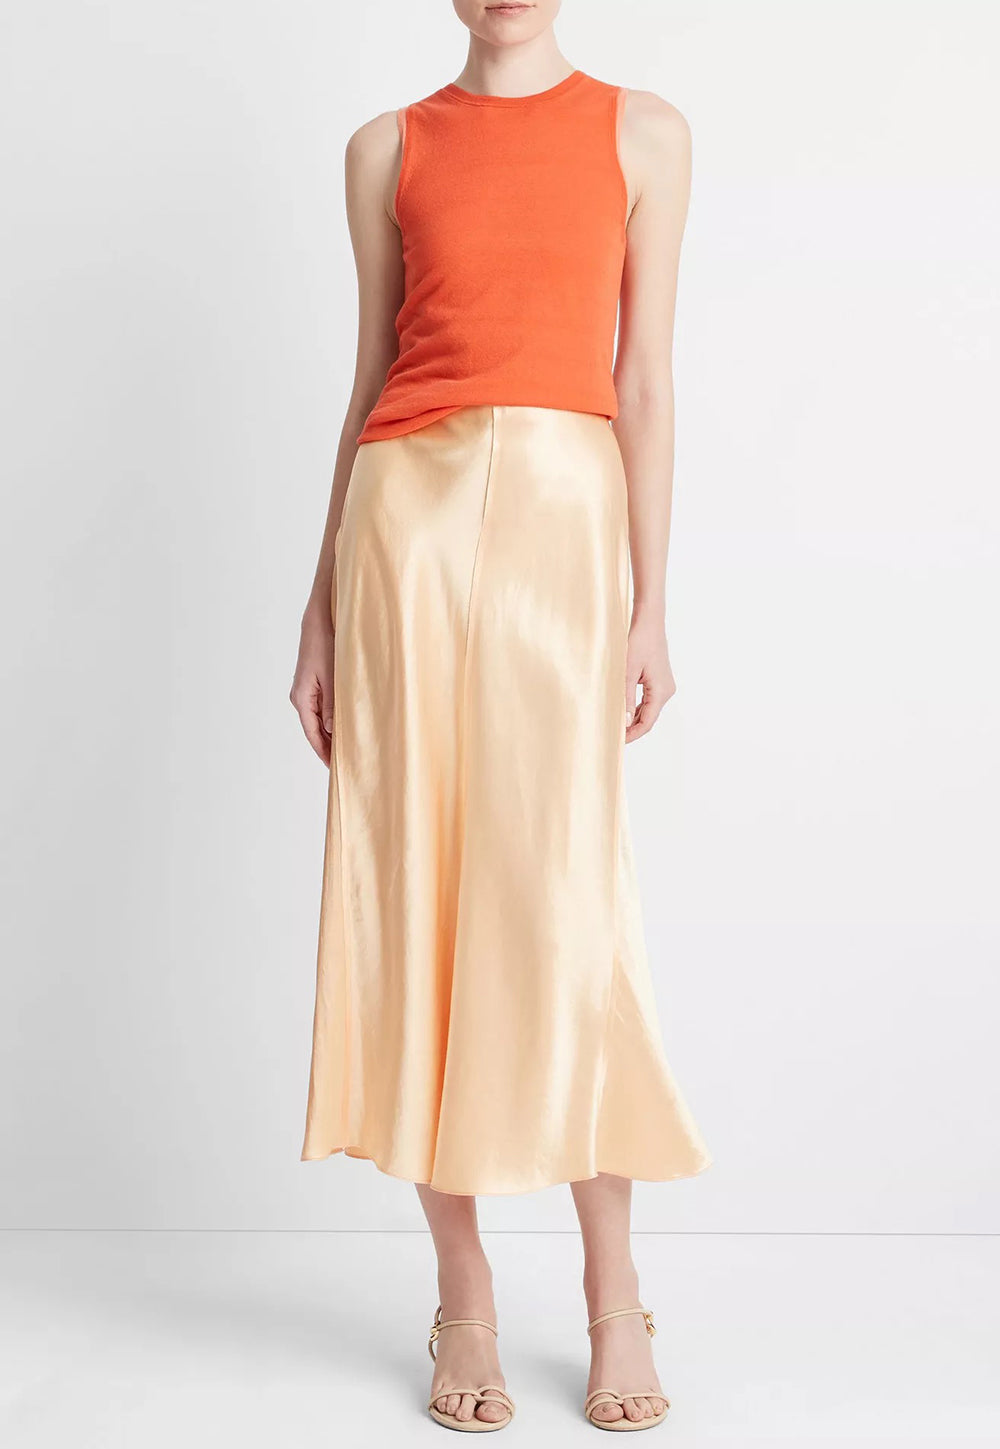 Raw Edge Panelled Slip Skirt - Cantaloupe sold by Angel Divine